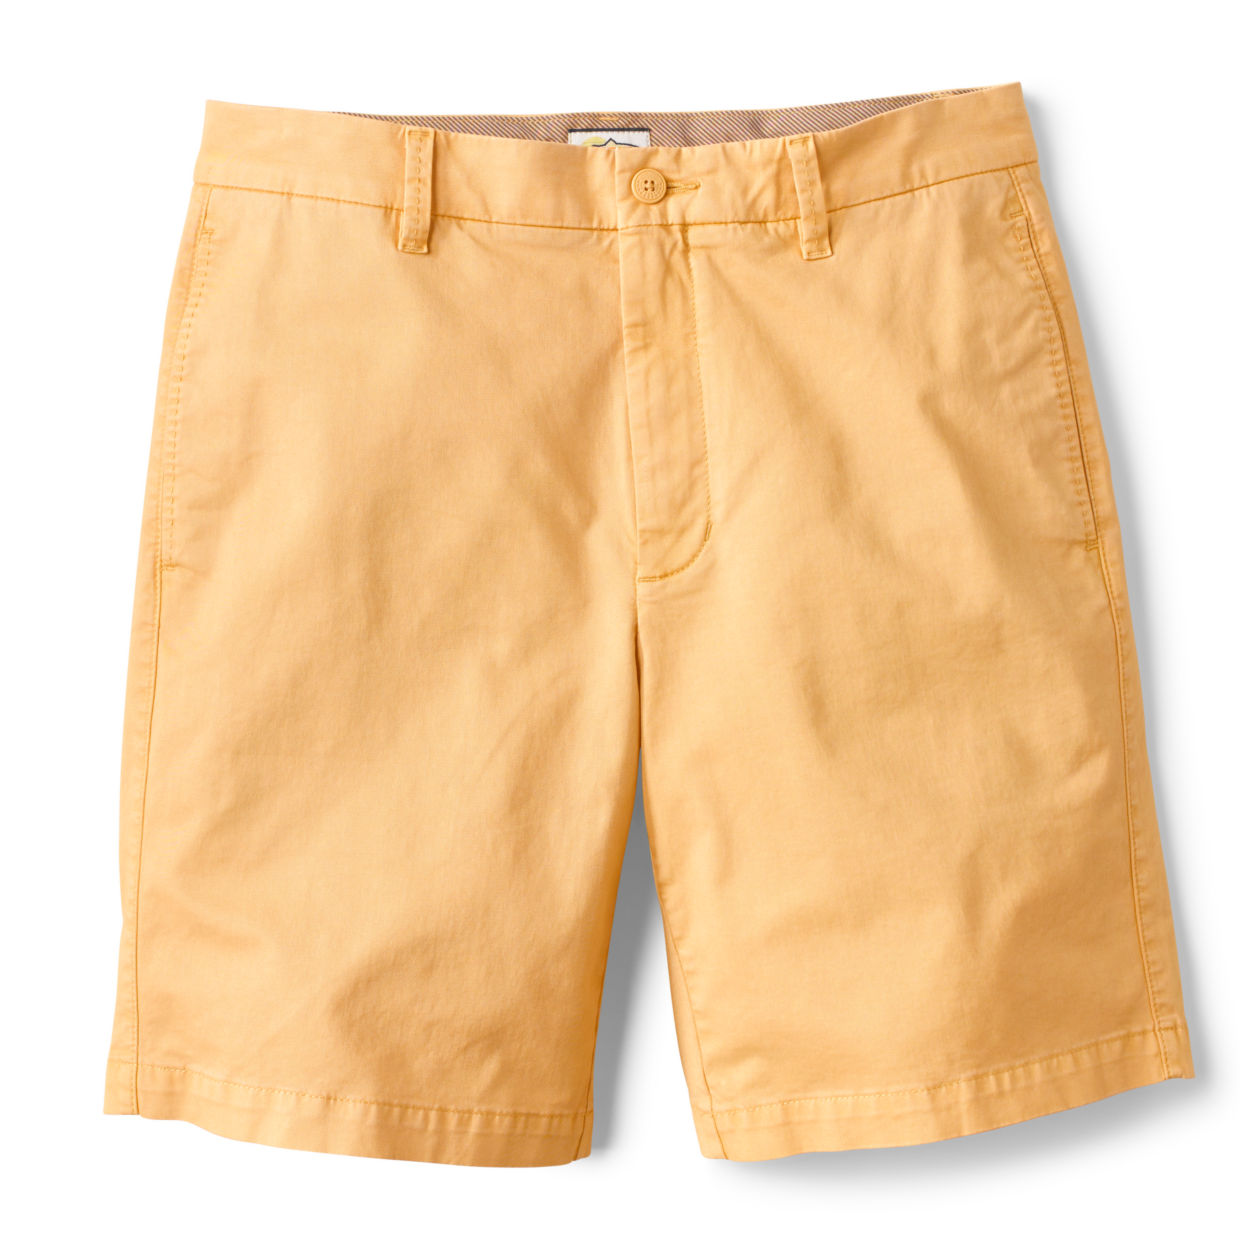 Men's Angler Stretch Twill Chino Shorts Wheat Size 34 Cotton Orvis